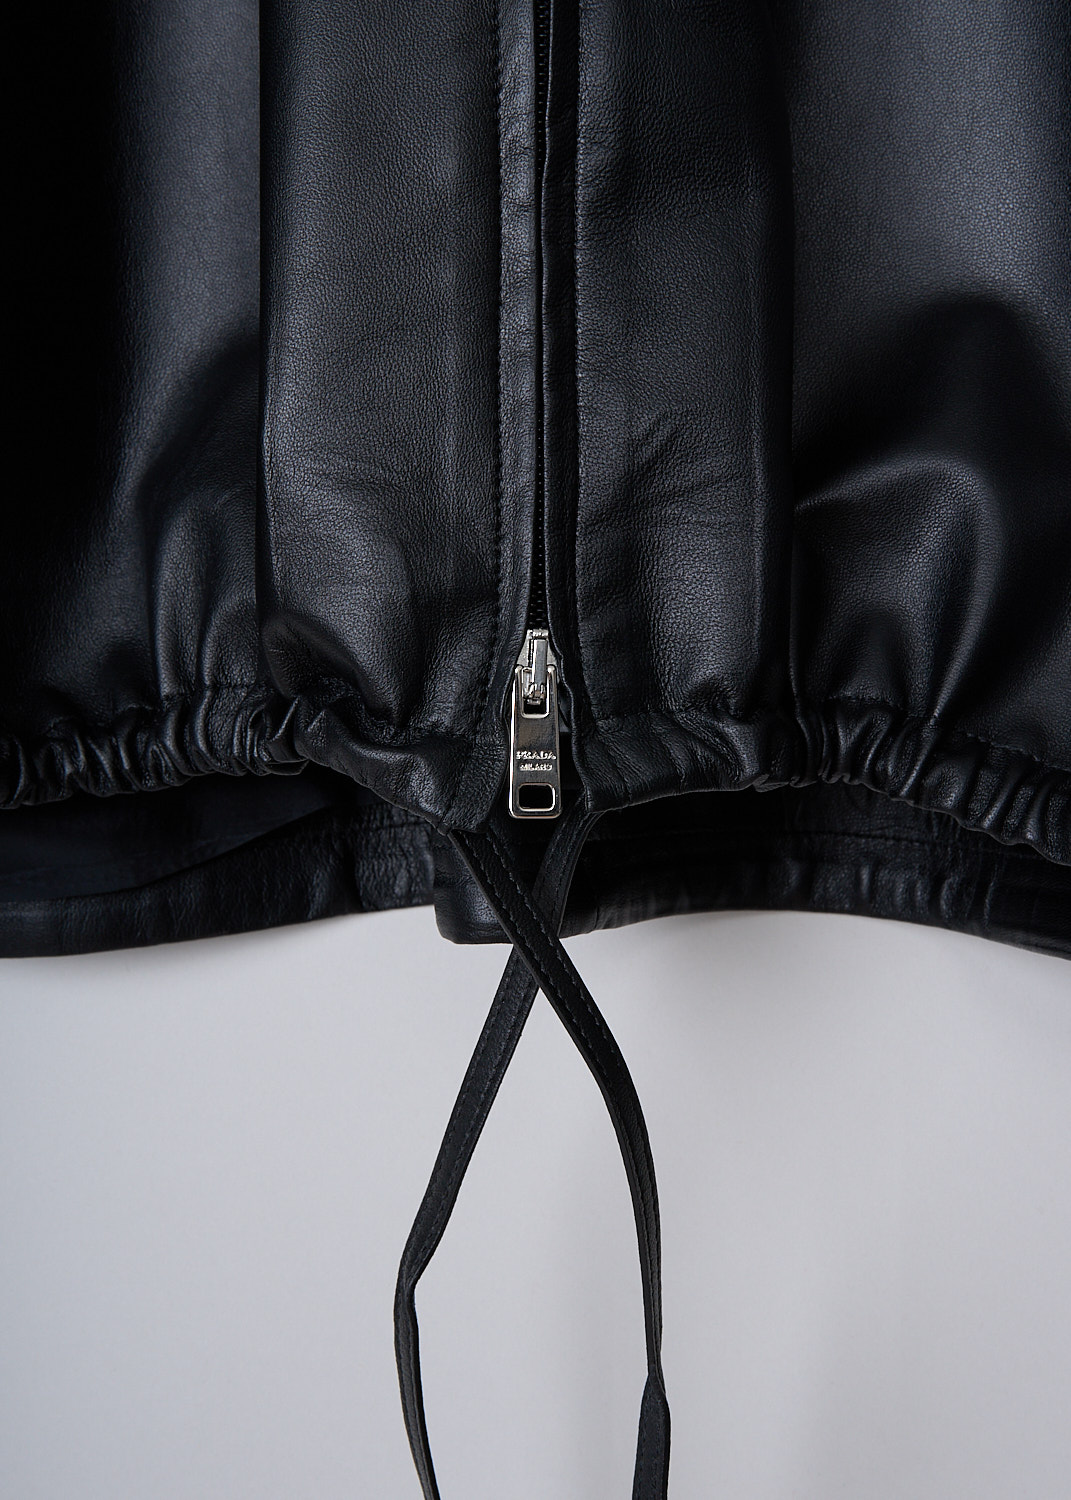 PRADA, BLACK HOODED LEATHER JACKET, 58853_JHI_F0002_NAPPA_NERO, Black, Detail 1, This black leather jacket has a hood with drawstrings. The jacket has a silver-tone two-way zipper in the front. Slanted welt pockets can be found in the front. The jacket has a stormflap in the front and back. The straight hemline has drawstring. The jacket has a wider silhouette. 
